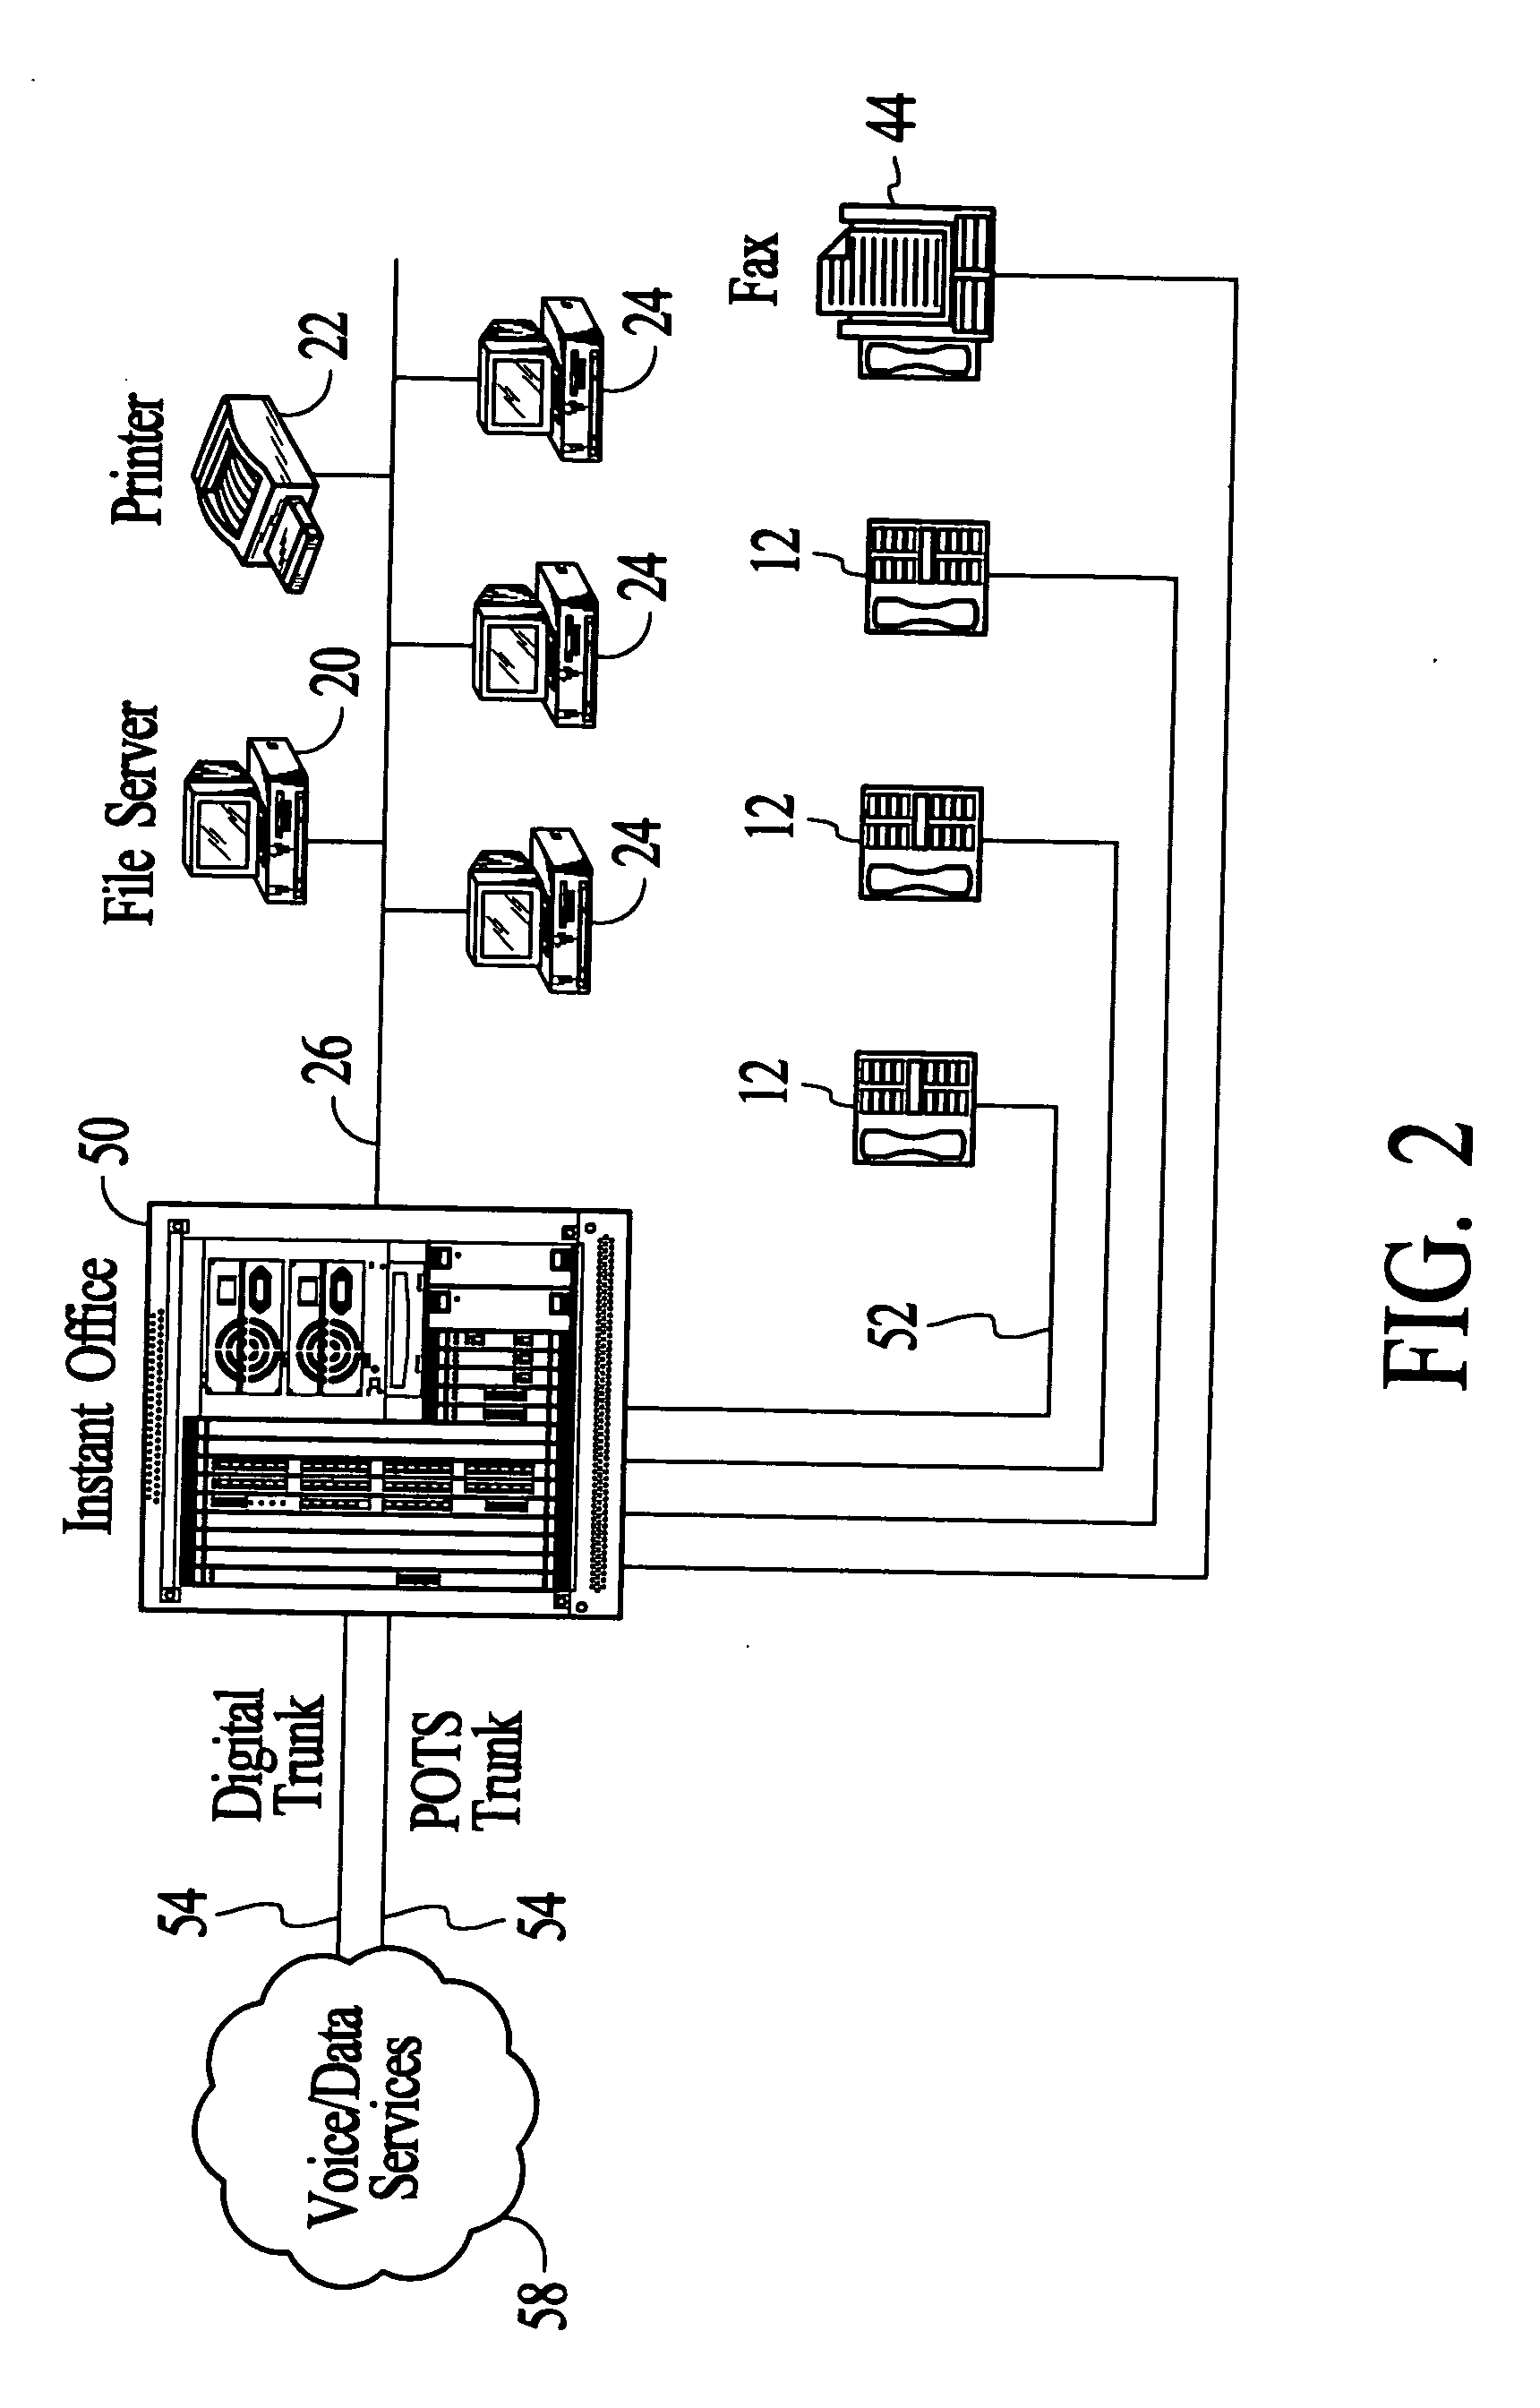 Systems and methods for TDM/packet communications using telephony station cards including voltage generators